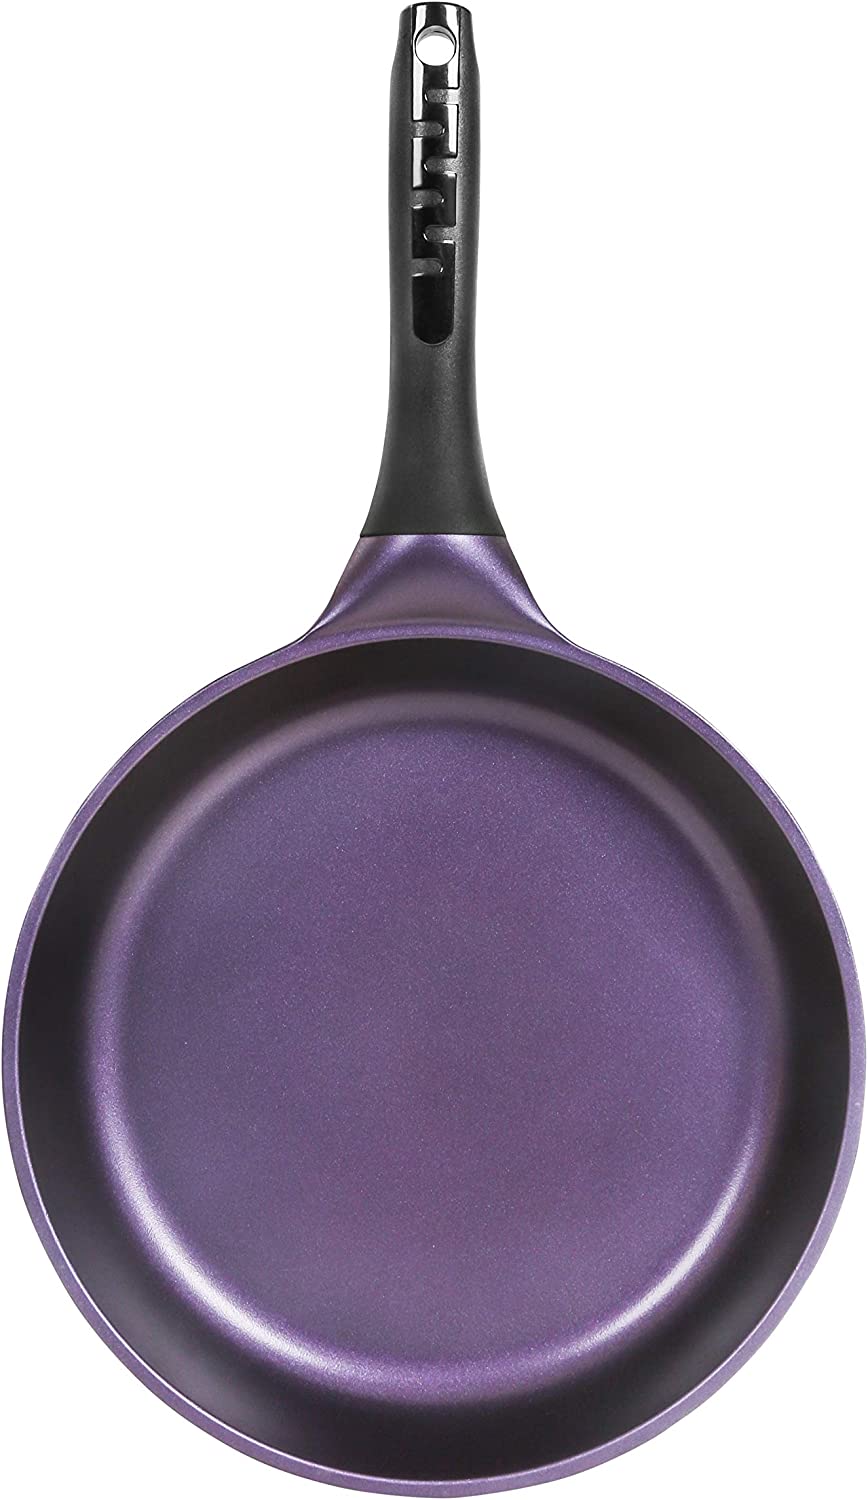 Concord PurpleChef 10.5 in Perfect Pan Nonstick Frying Pan Omelet Skillet Cookware - Induction Compatible